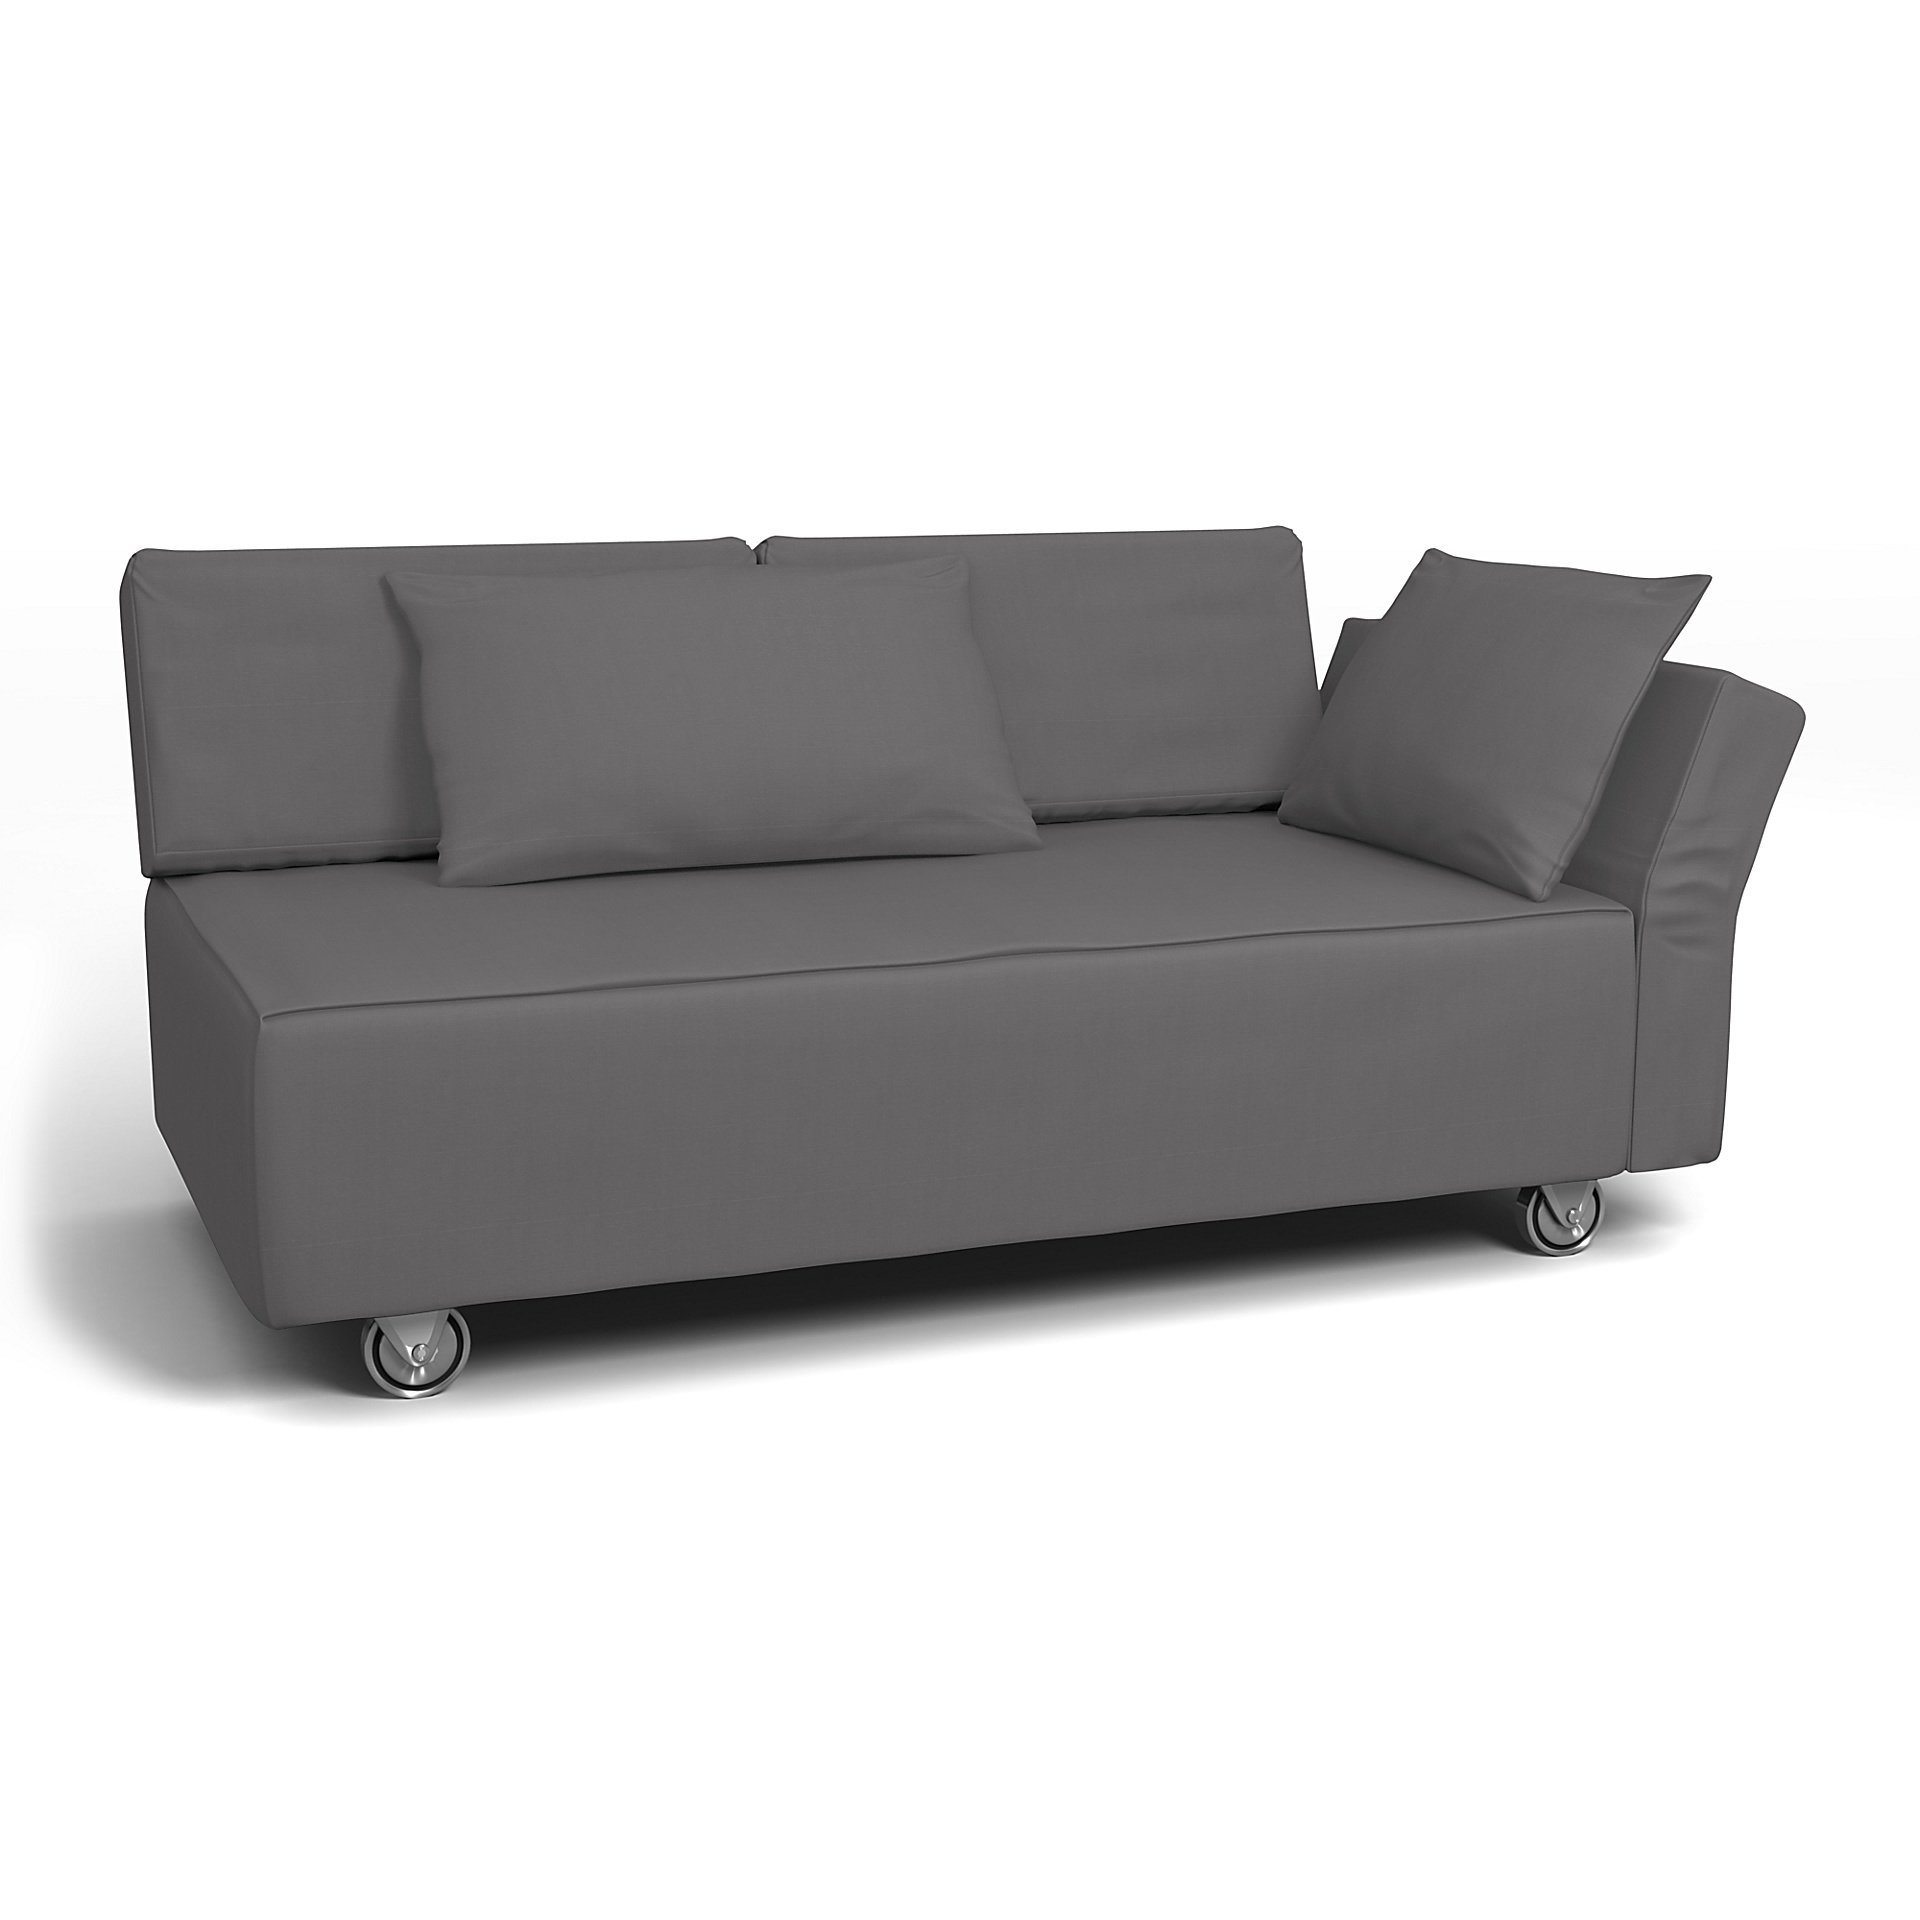 IKEA - Falsterbo 2 Seat Sofa with Right Arm Cover, Smoked Pearl, Cotton - Bemz